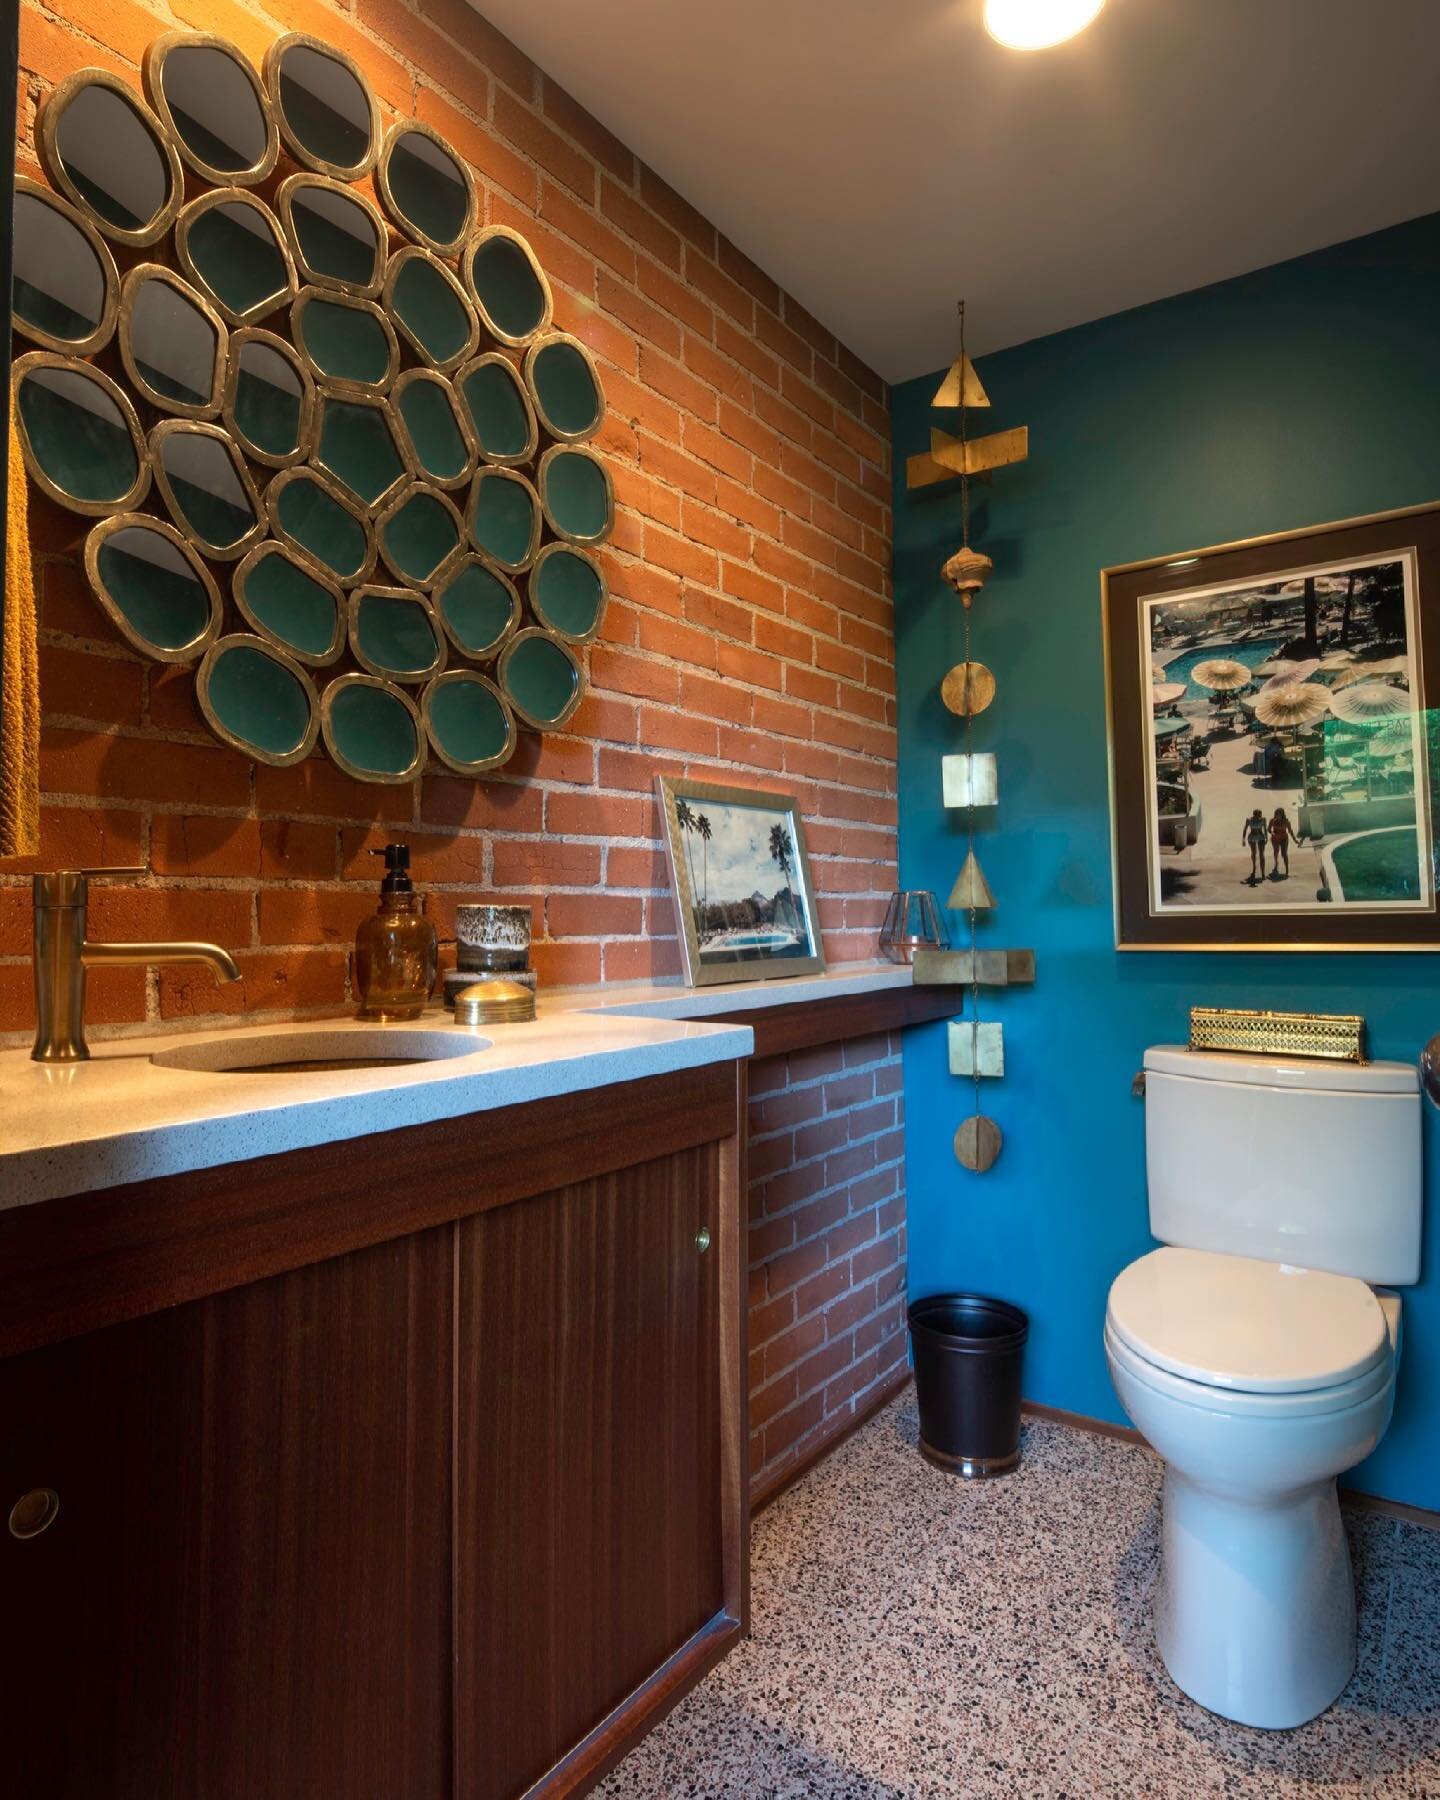 The other side of the brick wall that was discovered during demolition was conveniently located in the powder room, where exposing it was a no-brainer. In a sketch, I threw in a fun mirror as a place holder for something whimsical. Half way through c